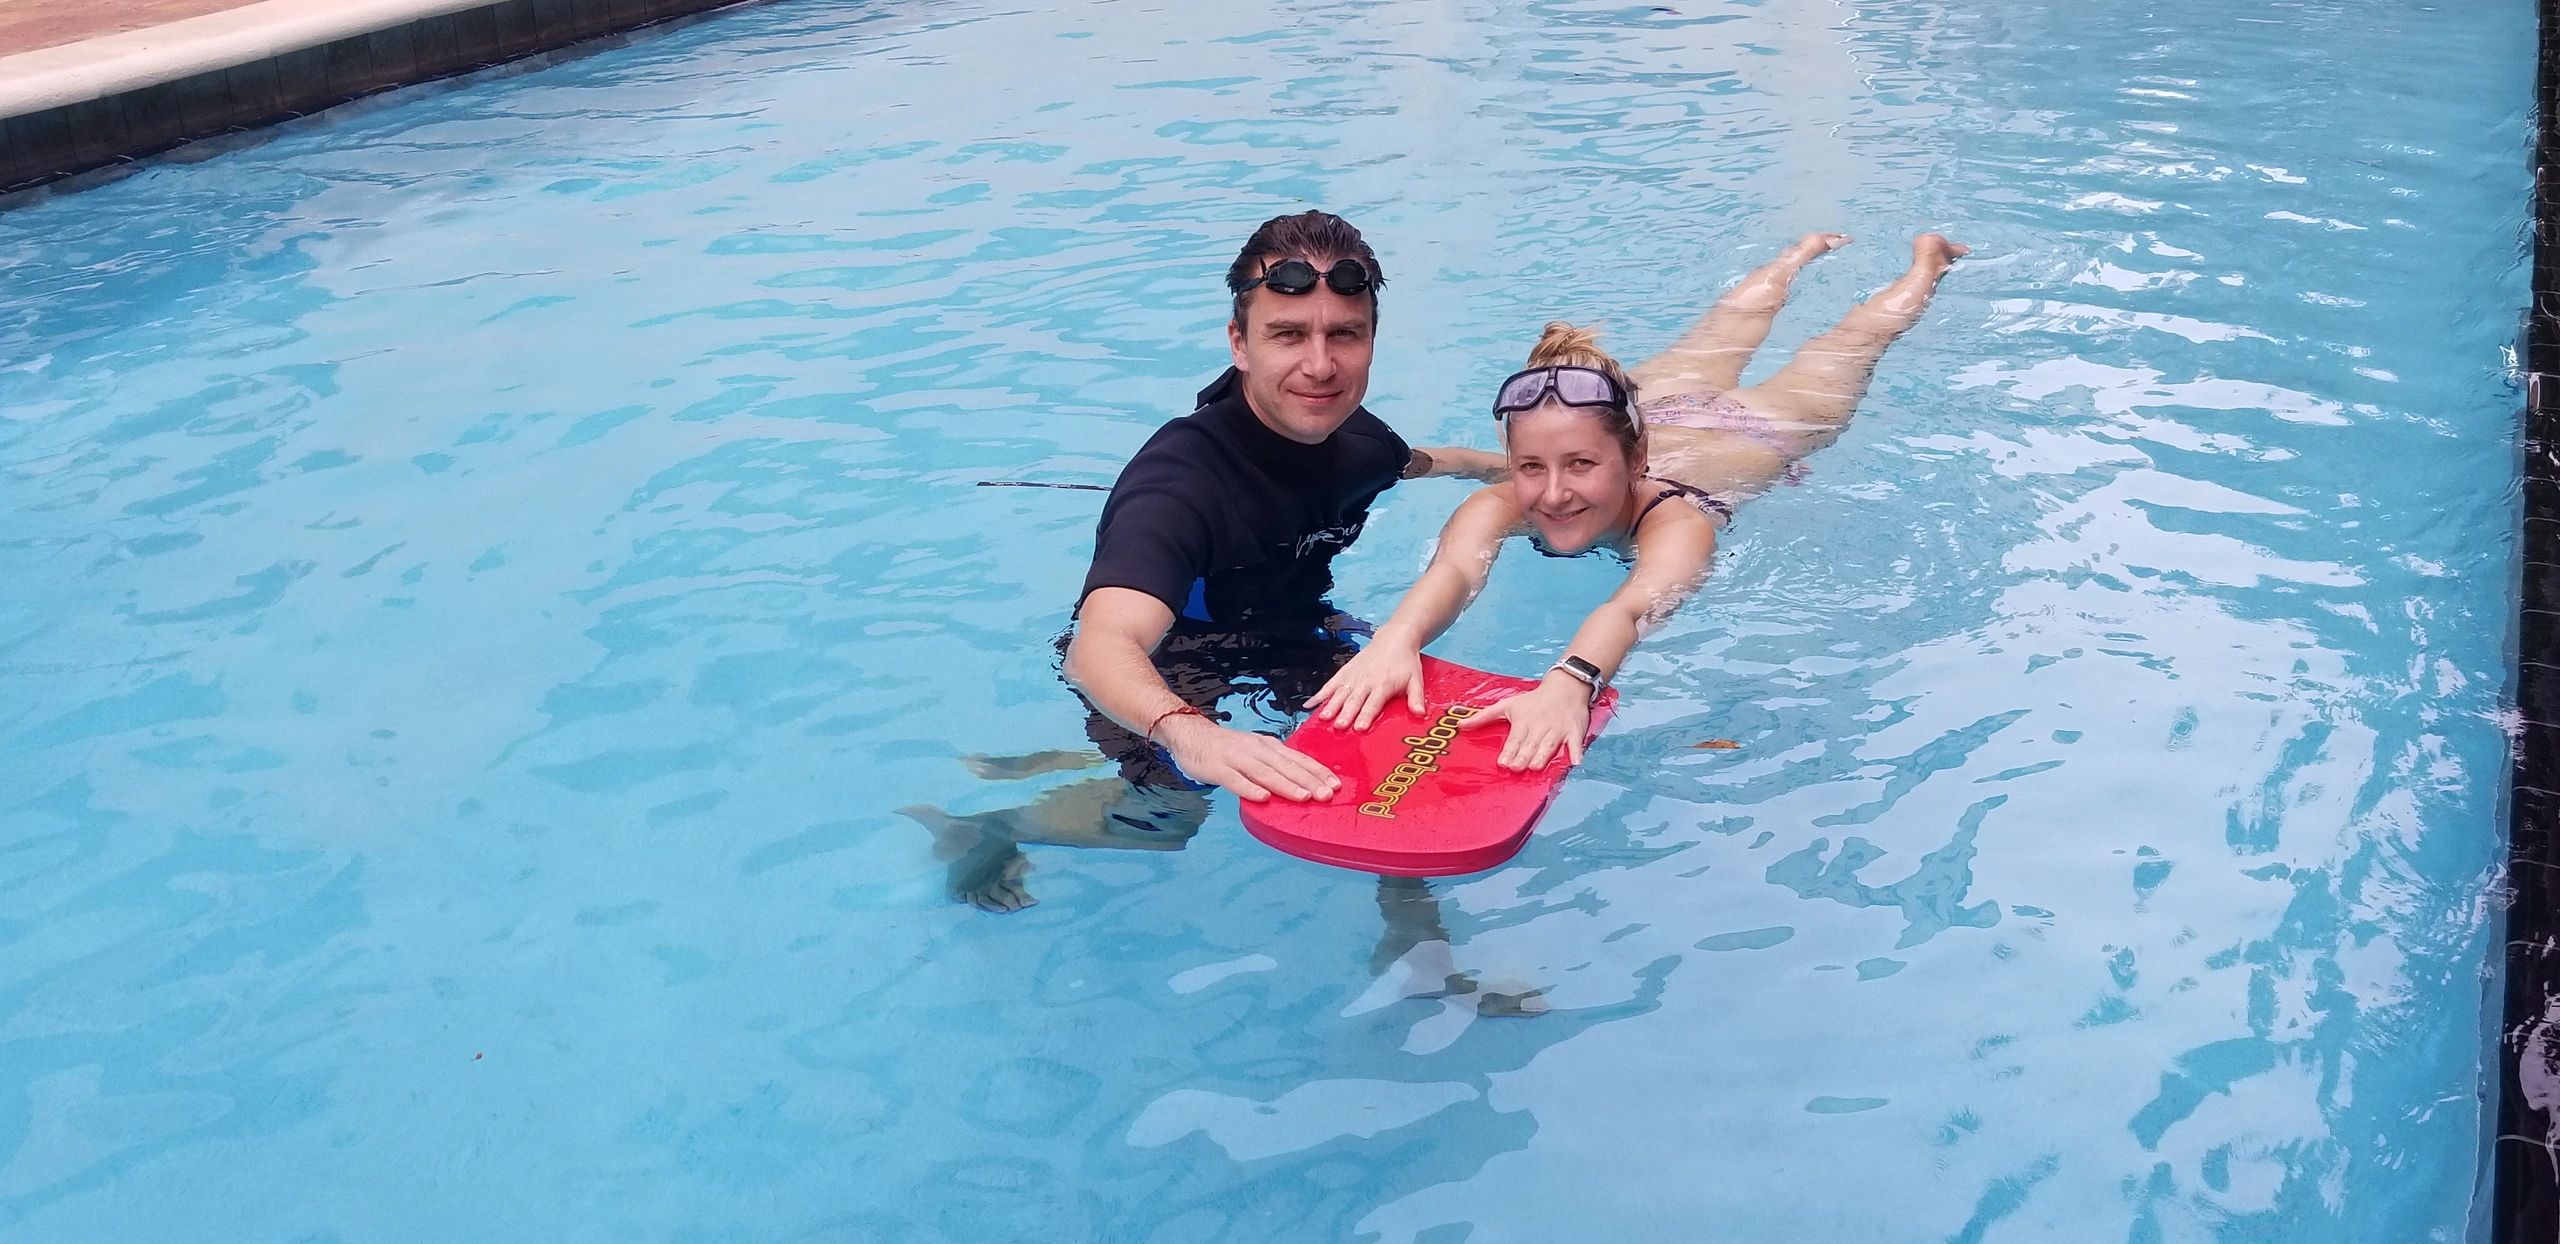 Private swimming lessons help children and adults to get read of fear of water